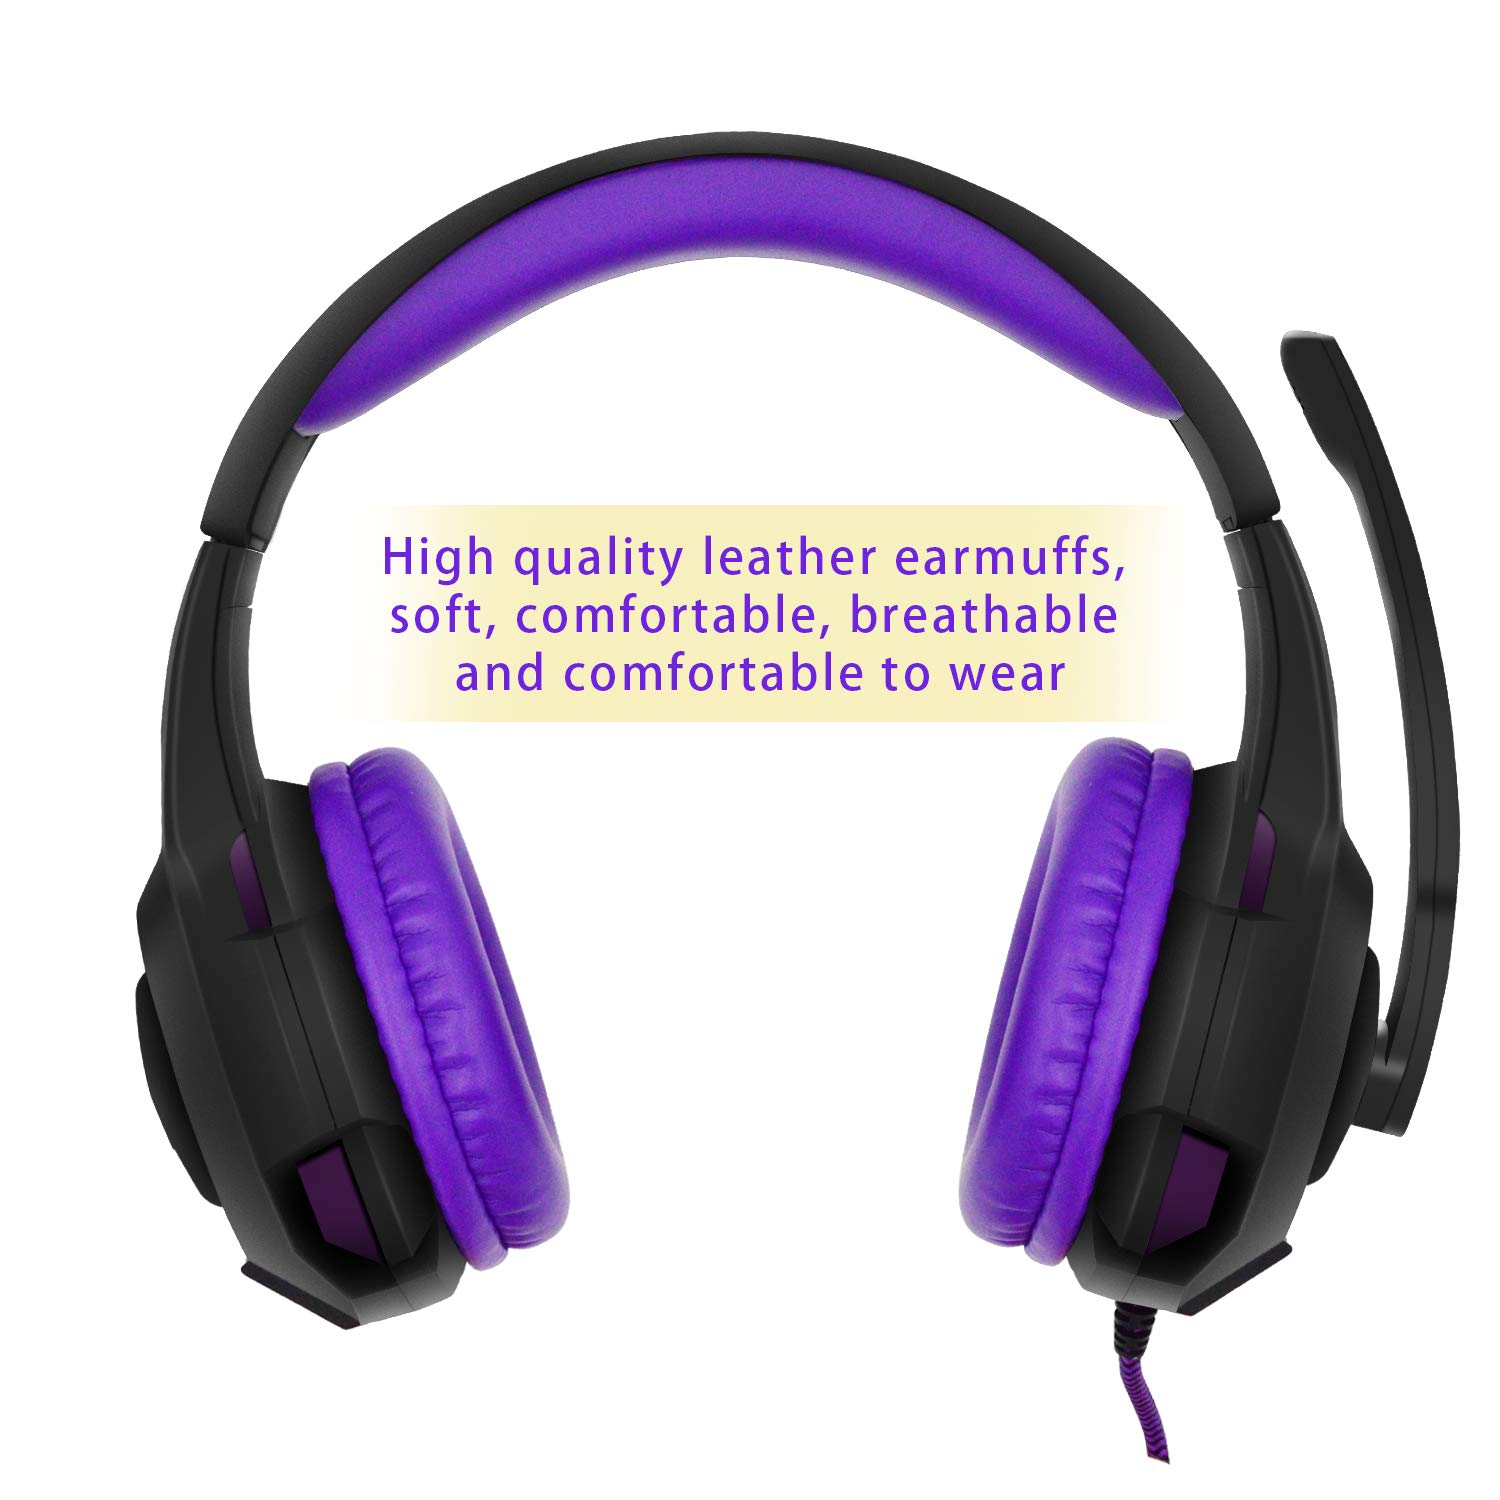 PC Gaming Headsets PS4 Headset for Xbox One - AH68 Wired Stereo Over Ear Gaming Headphone with Microphone for PC Computer, MAC Laptop, Playstation 4, Xbox one Controller, Phones,Tablet, PSP, Purple